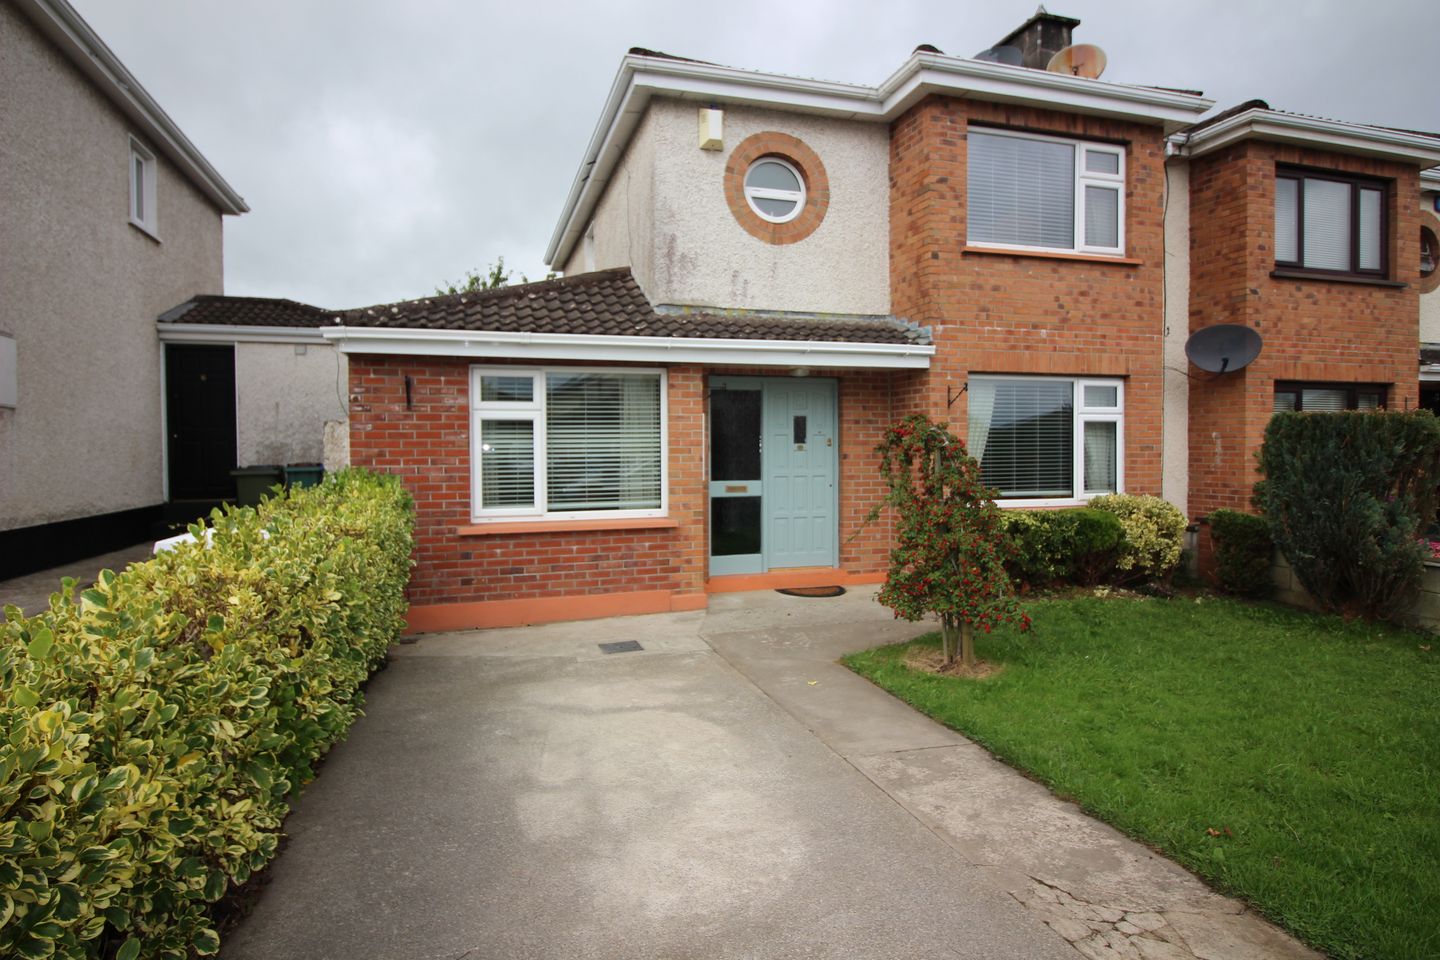 15 Bellevue Court, Father Russell Road, Dooradoyle, Co. Limerick, V94FP2W